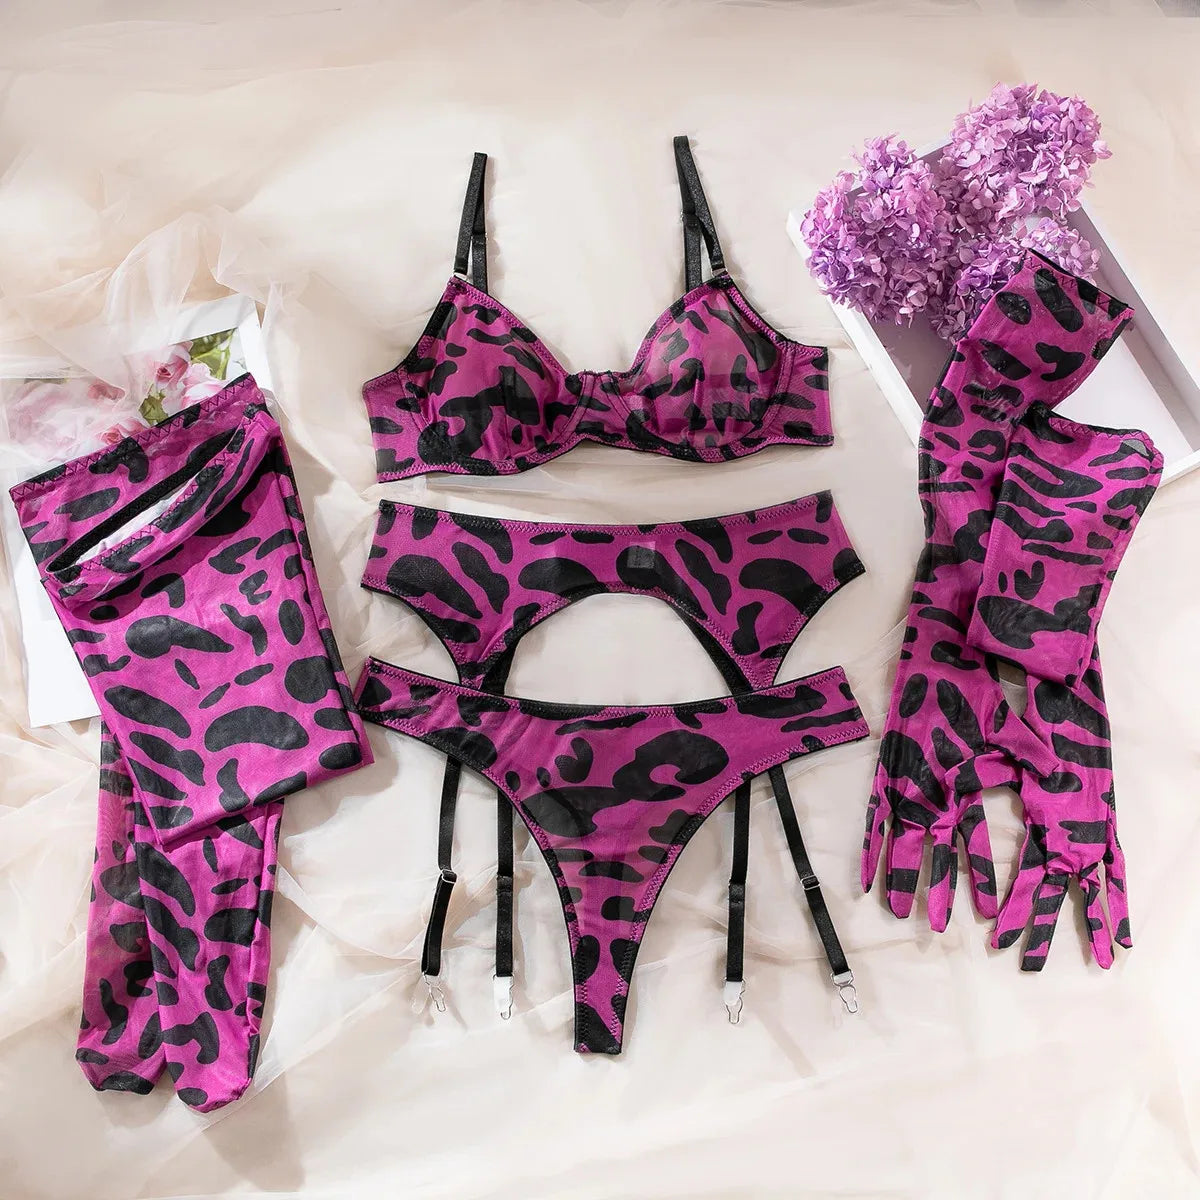 "Pink Purity: MALWear Hentai Leopard Lingerie Attire – Embrace timeless elegance in this pure white lingerie, a fusion of tradition and contemporary allure. Discover sophistication, shop now."